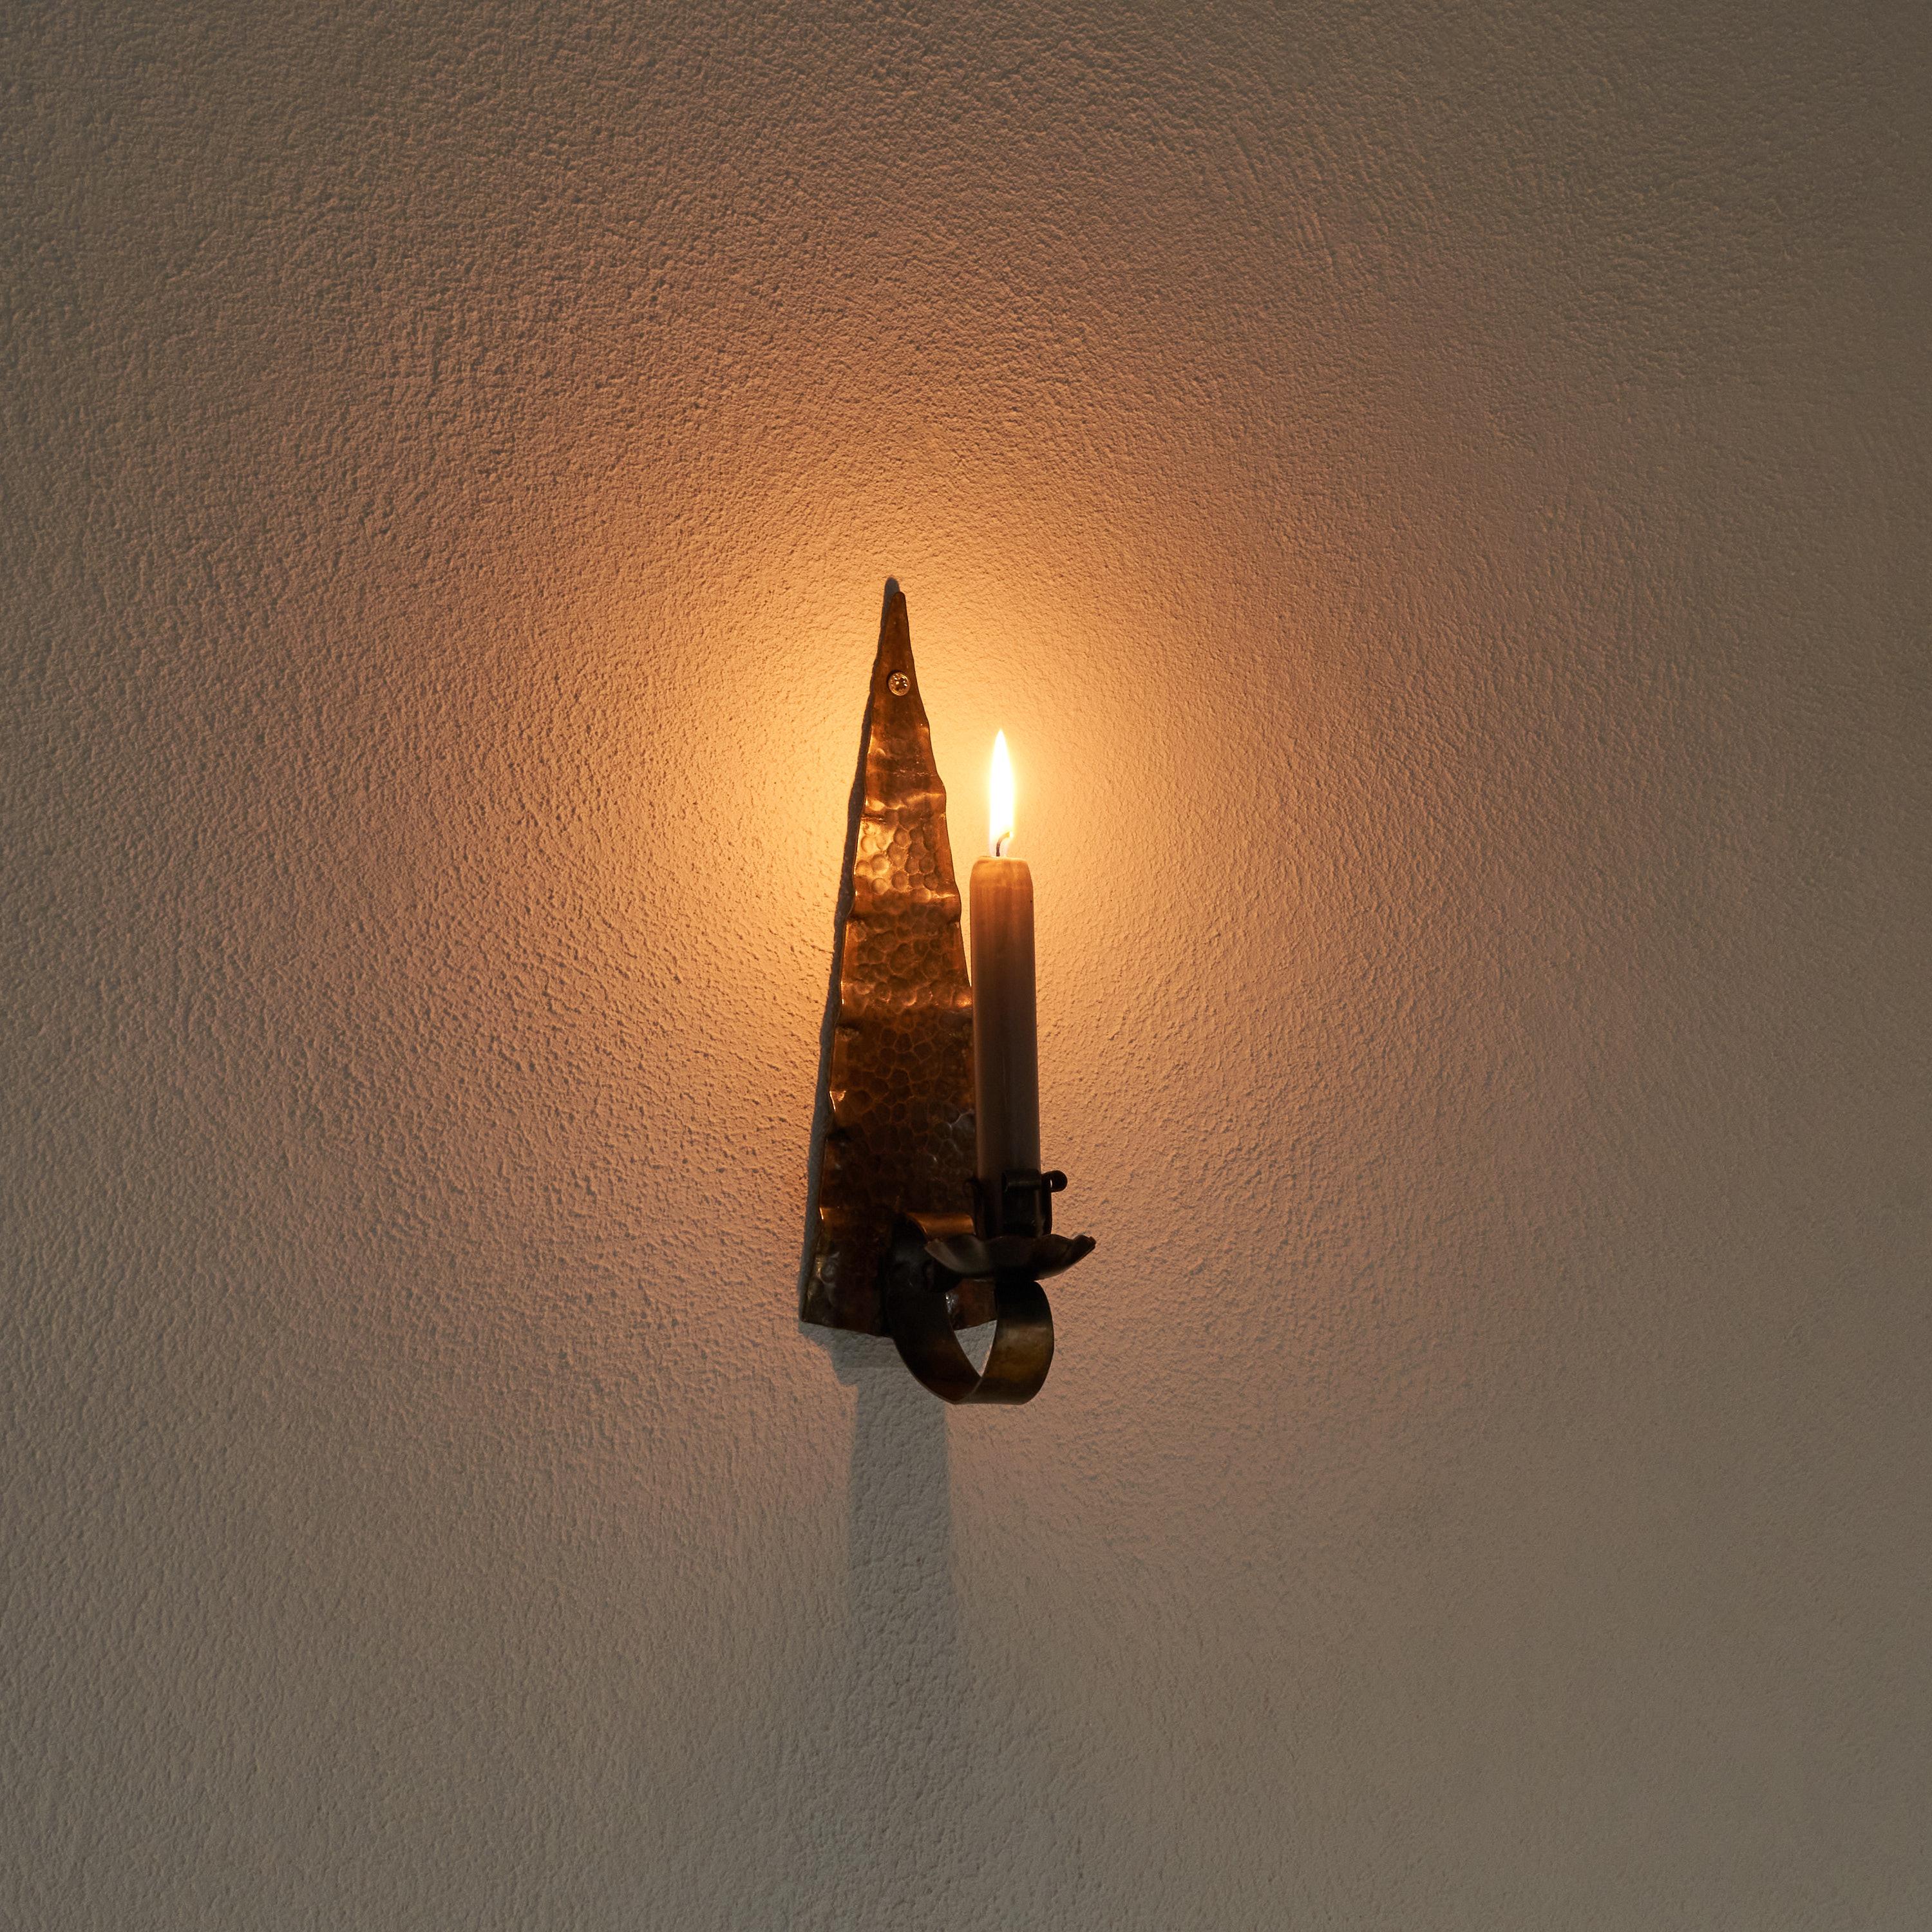 Dutch Art Deco Candle Sconce in Hand Hammered Copper, 1920s For Sale